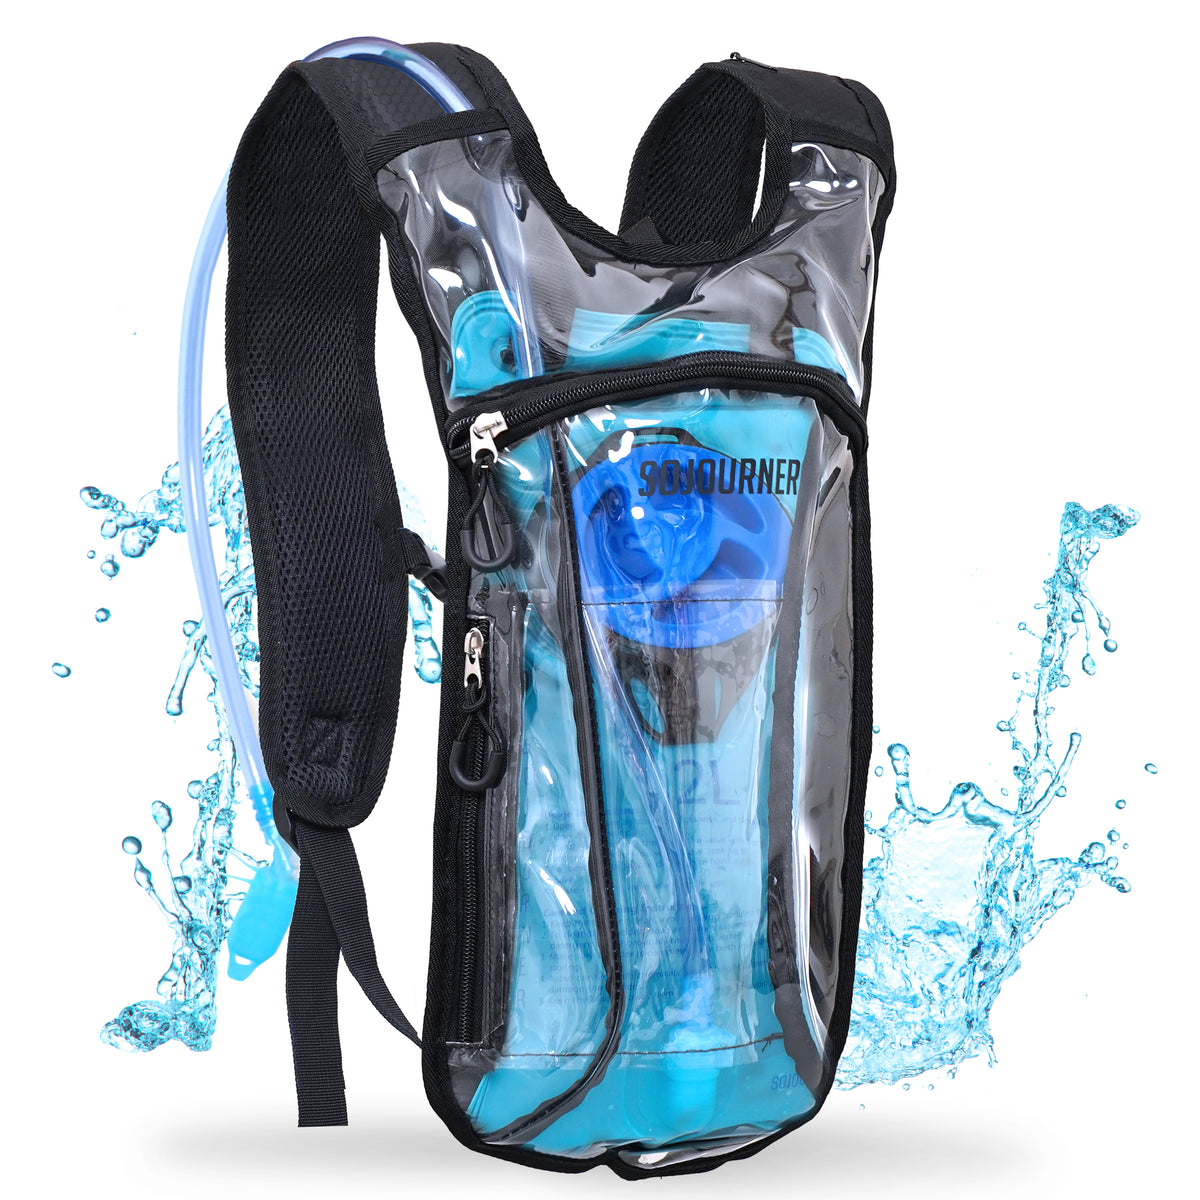 Hydration Pack Backpack - 2L Water Bladder - Transparent Clear